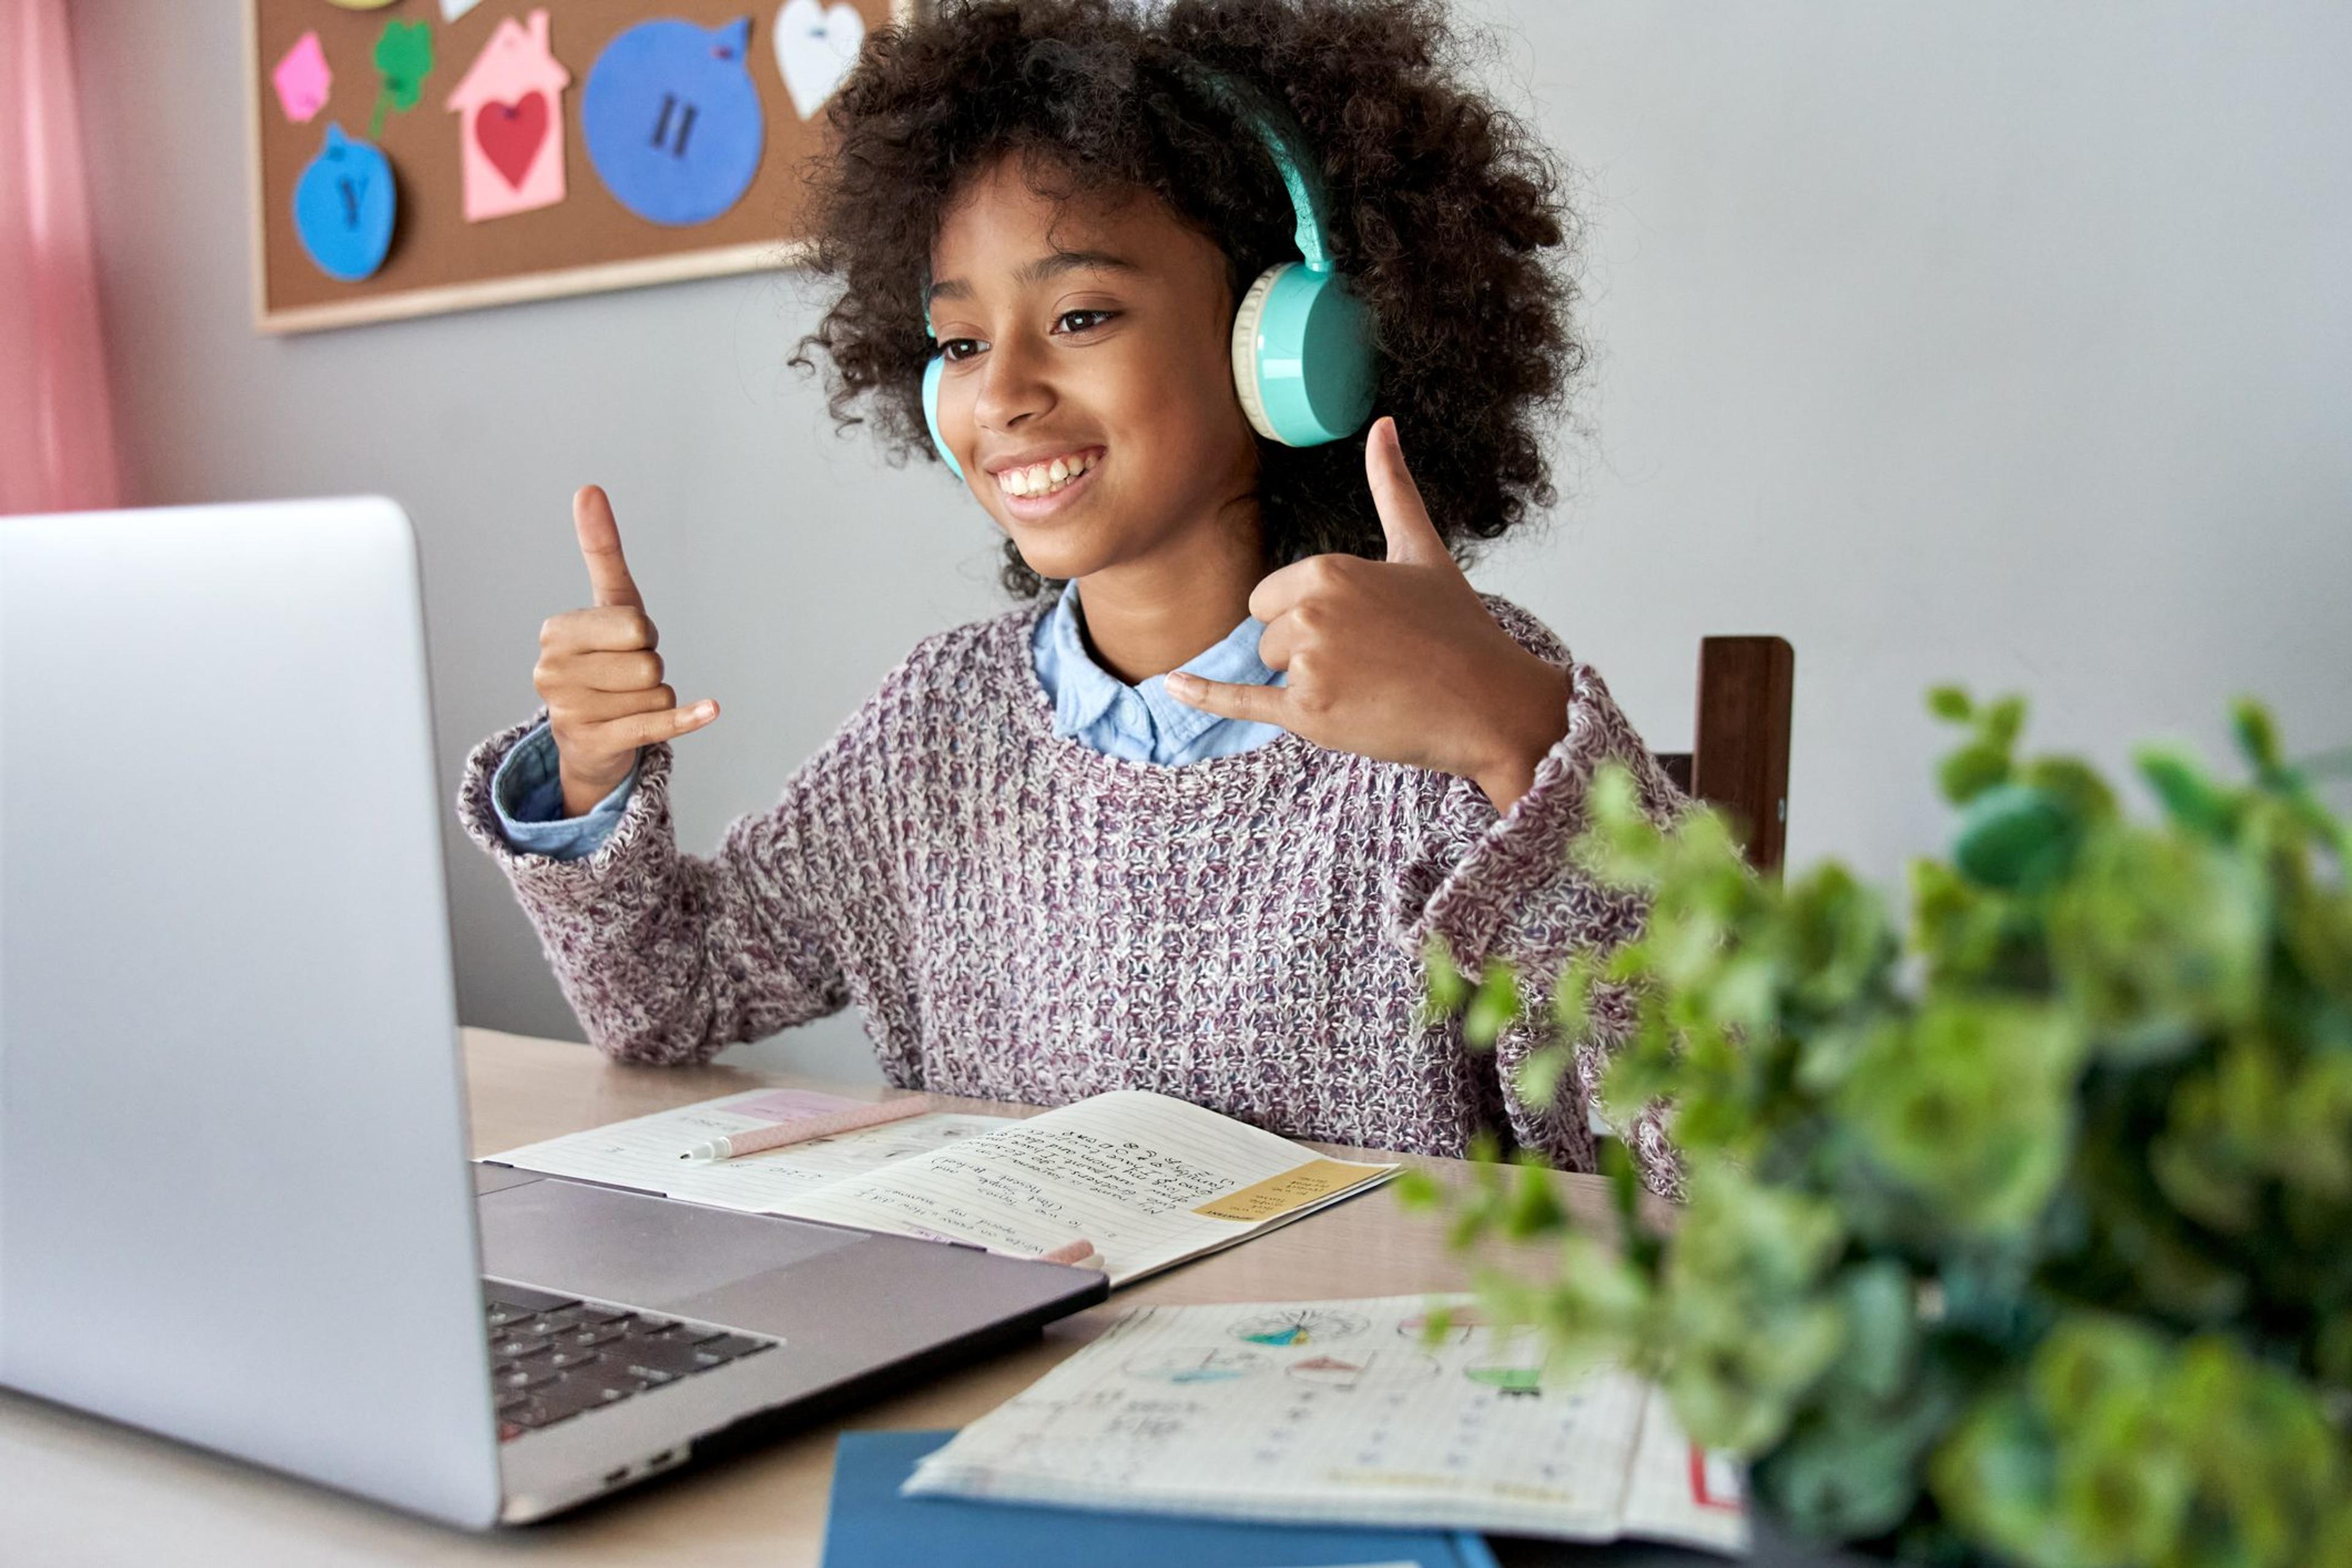 Smiling girl with headphones gives thumbs up while doing a virtual learning session